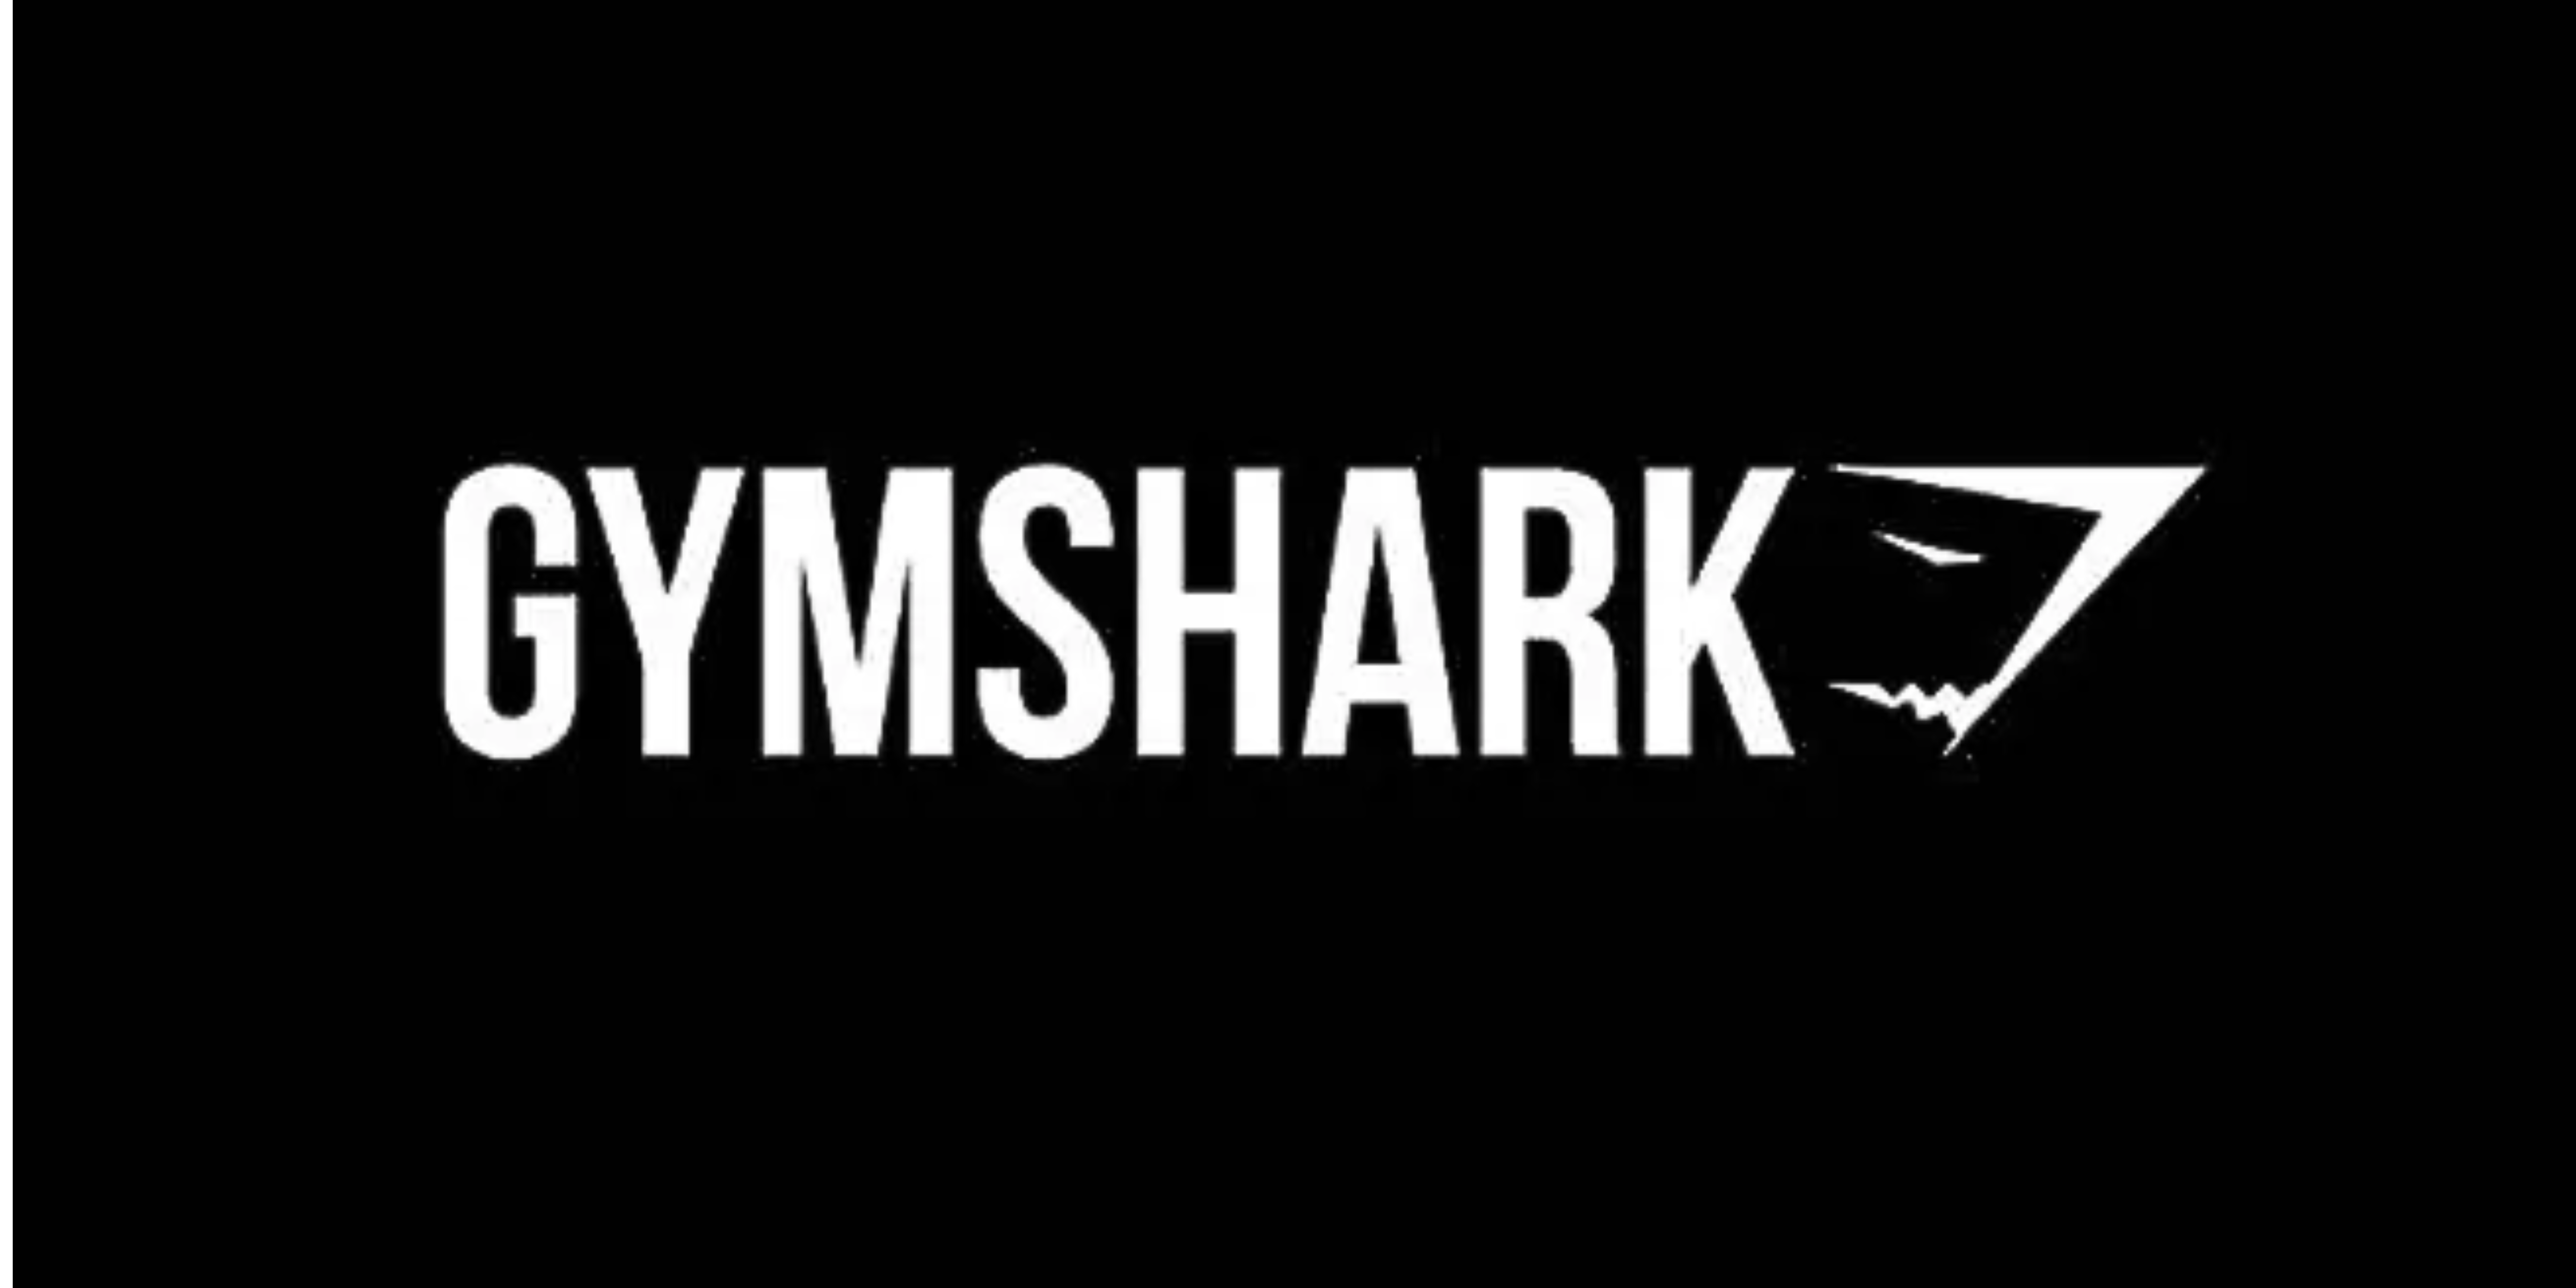 Gymshark moves to tackle workplace waste